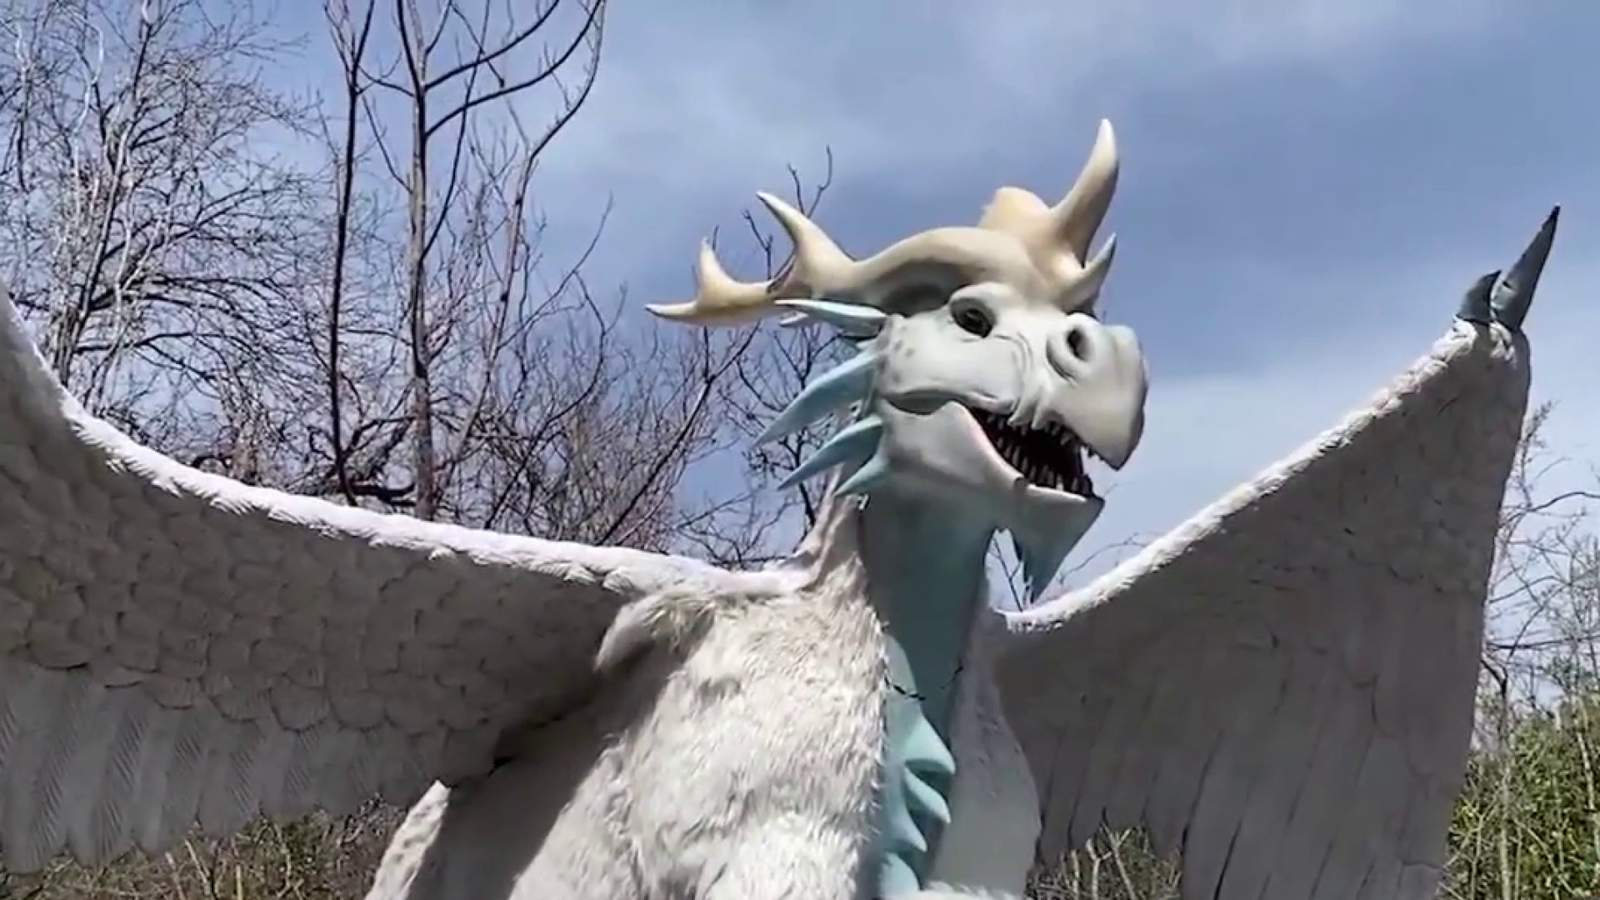 New Dragon Forest experience opens at San Antonio Zoo